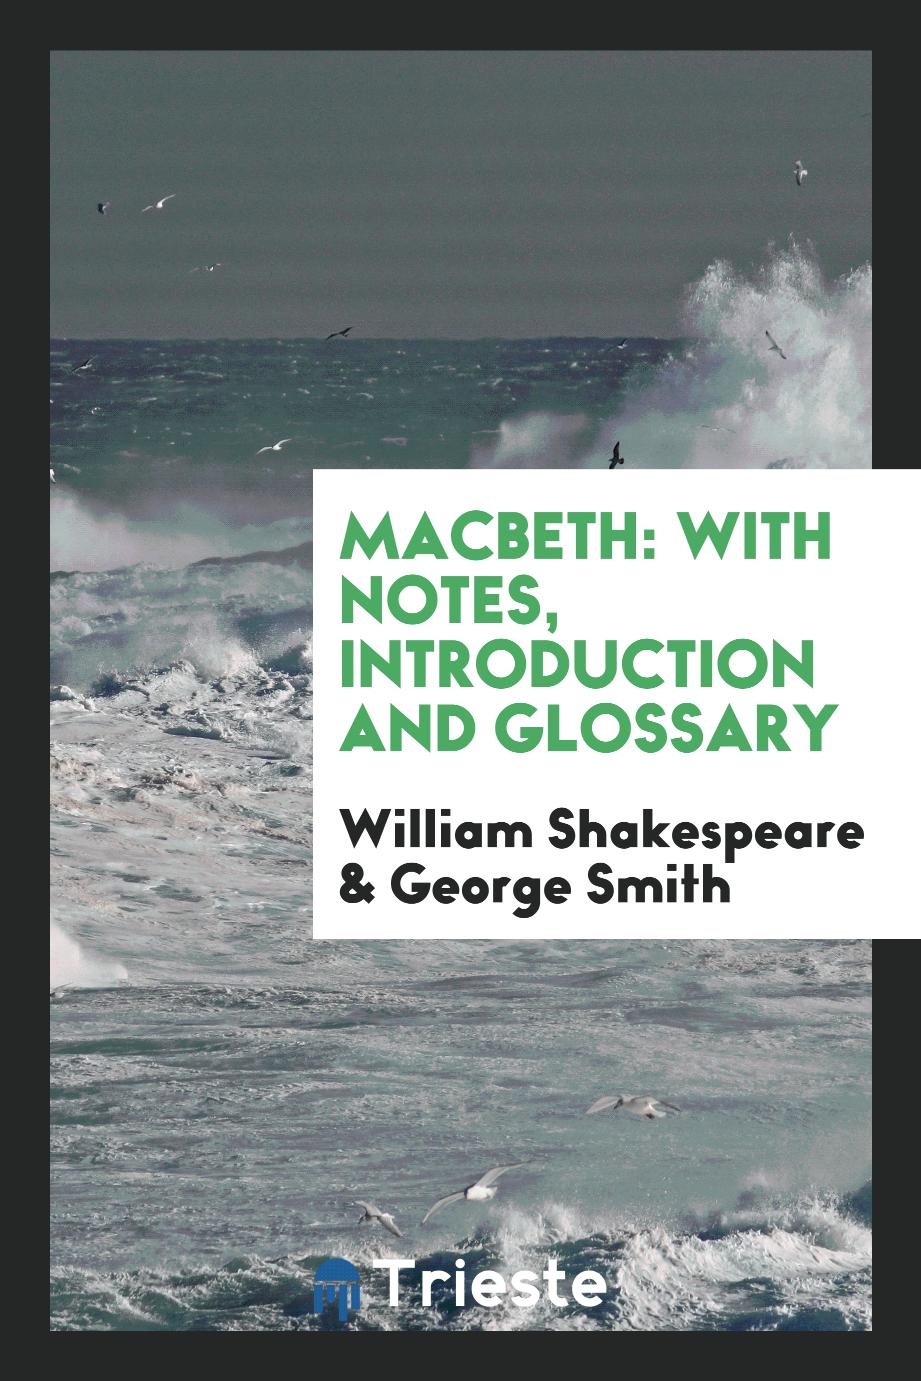 Macbeth: With Notes, Introduction and Glossary